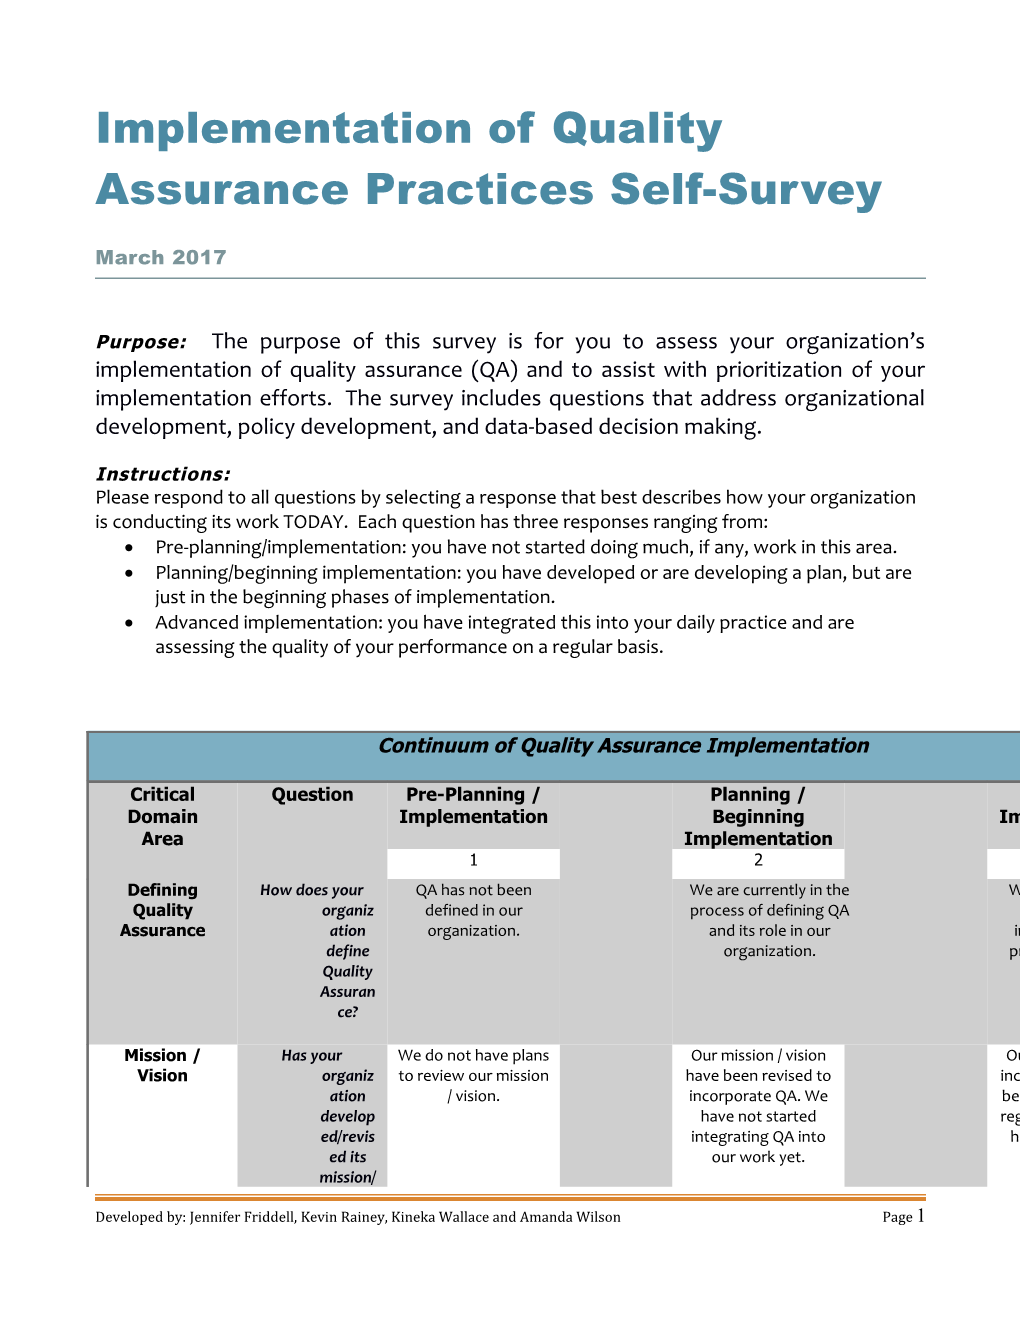 Implementation of Quality Assurance Practices Self-Survey